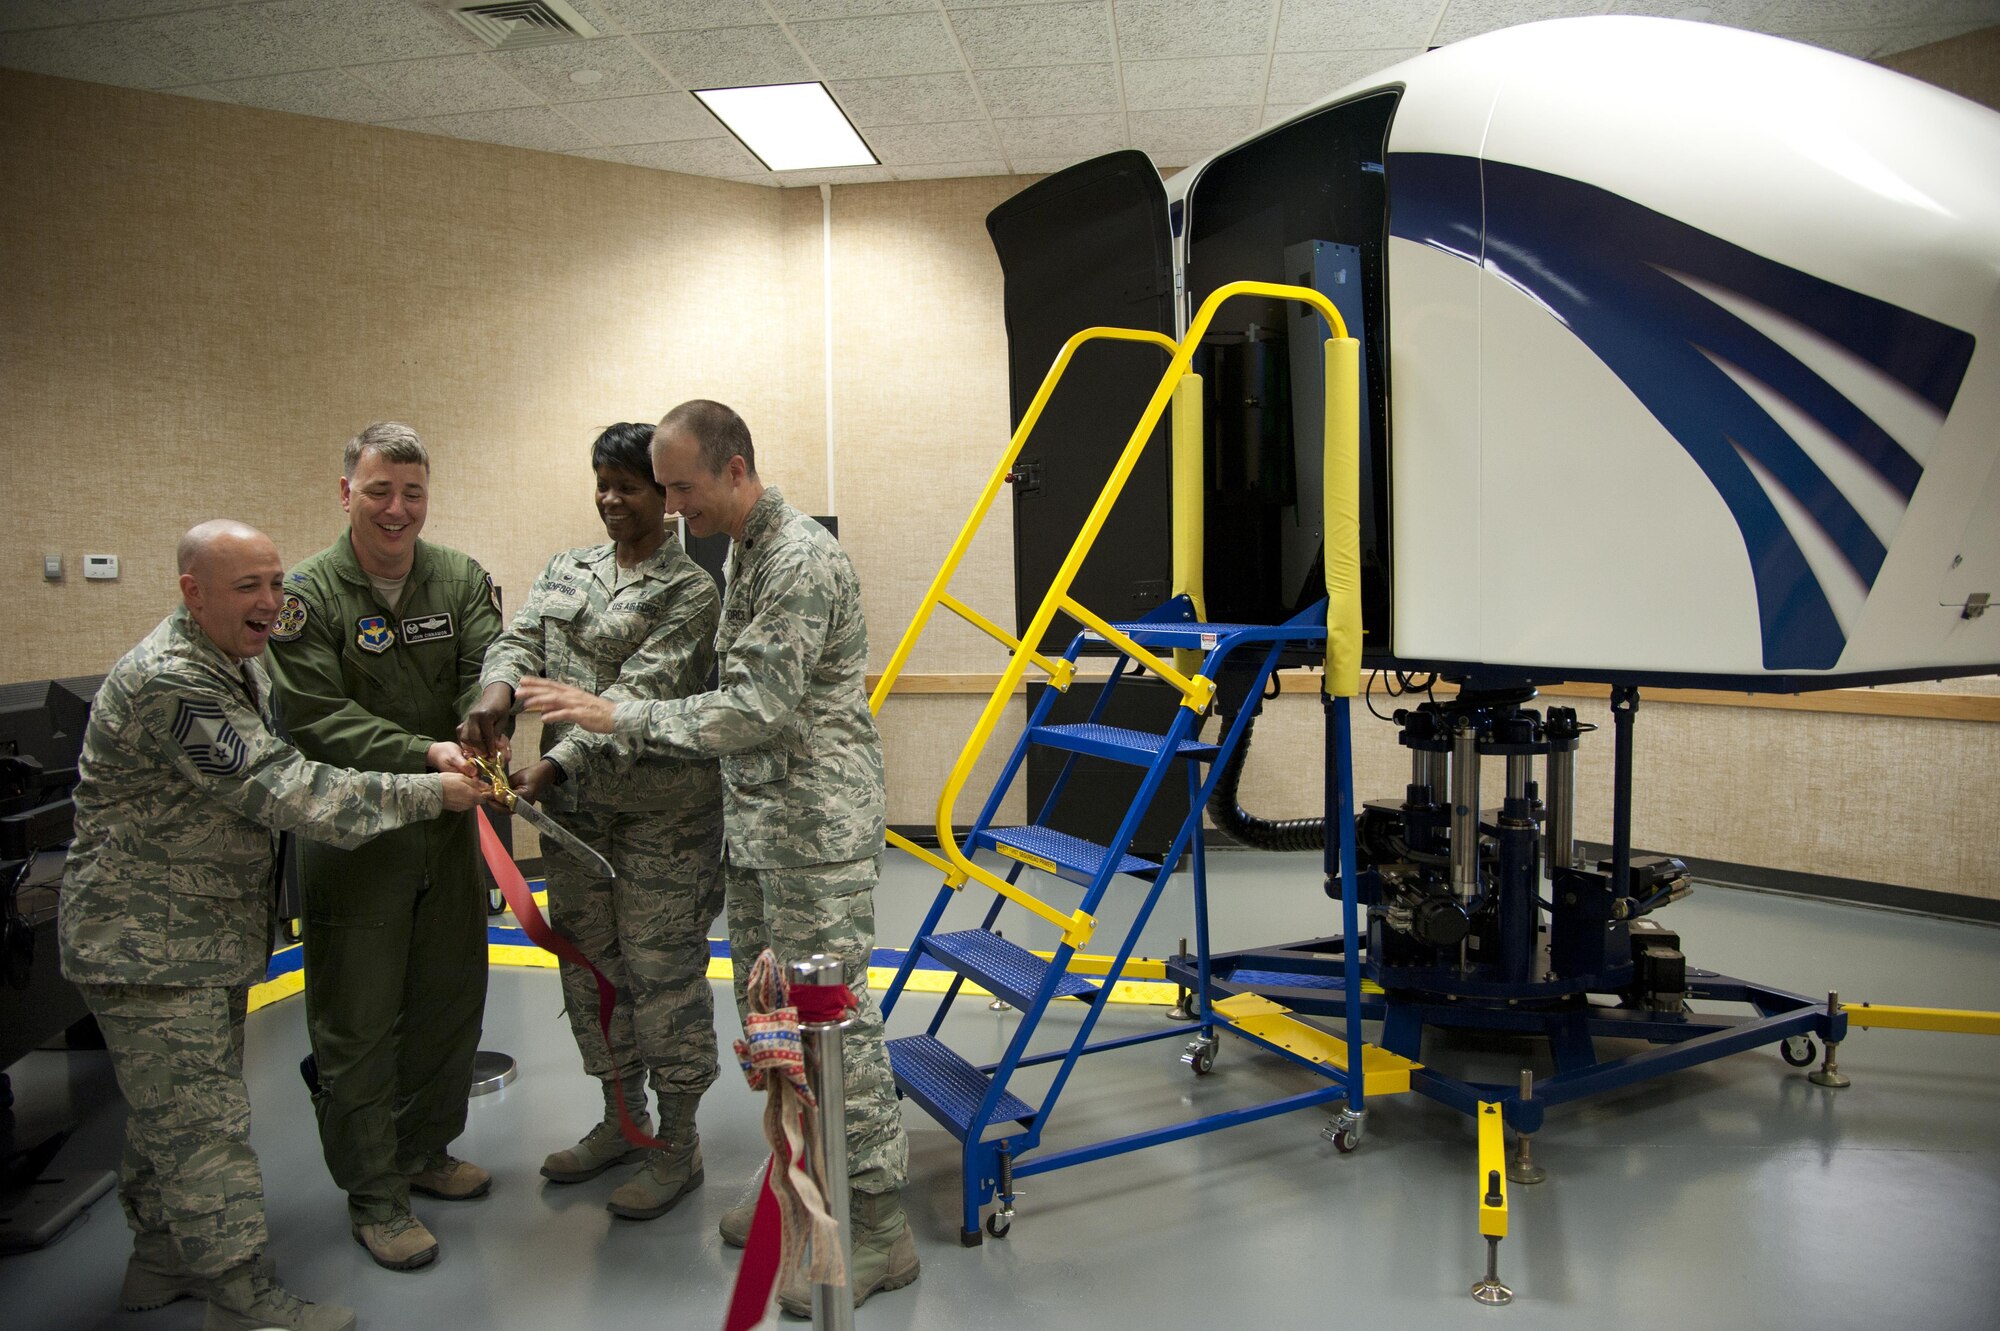 From the left, Chief Master Sgt. Joseph Powell, the 71st Medical Group superintendent, Col. John Cinnamon, the 71st Operations Group commander, Col. Kirsten Benford, the 71st MDG commander, and Lt. Col. Daniel Loveless, the 71st Medical Operations Squadron commander, cut the ribbon for the Spatial Disorientation Trainer during a ceremony July 1 at Vance Air Force Base, Oklahoma. (U.S. Air Force photo by Staff Sgt. Nancy Falcon) 